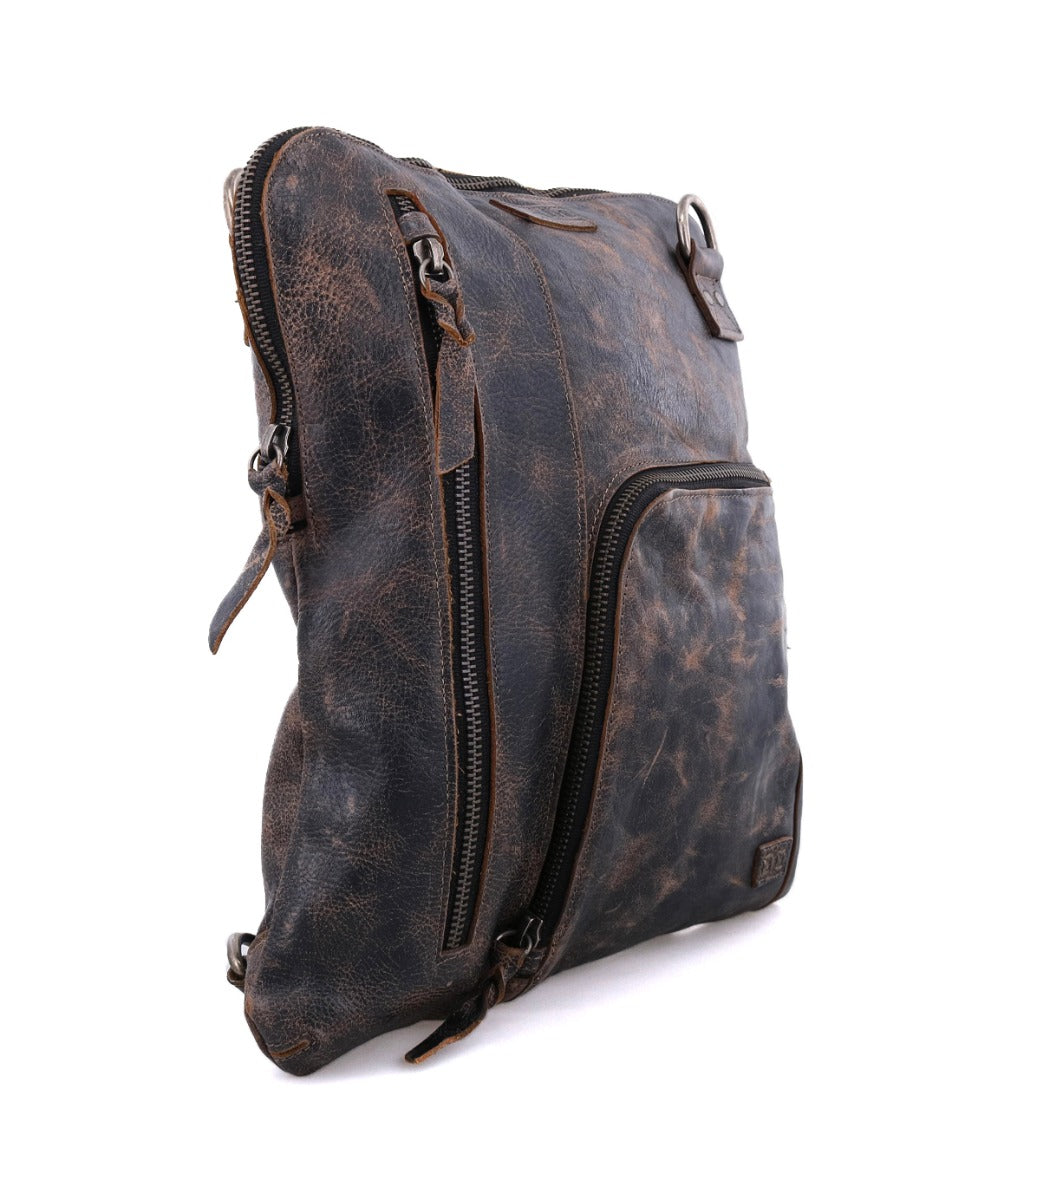 A Bed Stu Aiken distressed black leather backpack with zippers on the side.